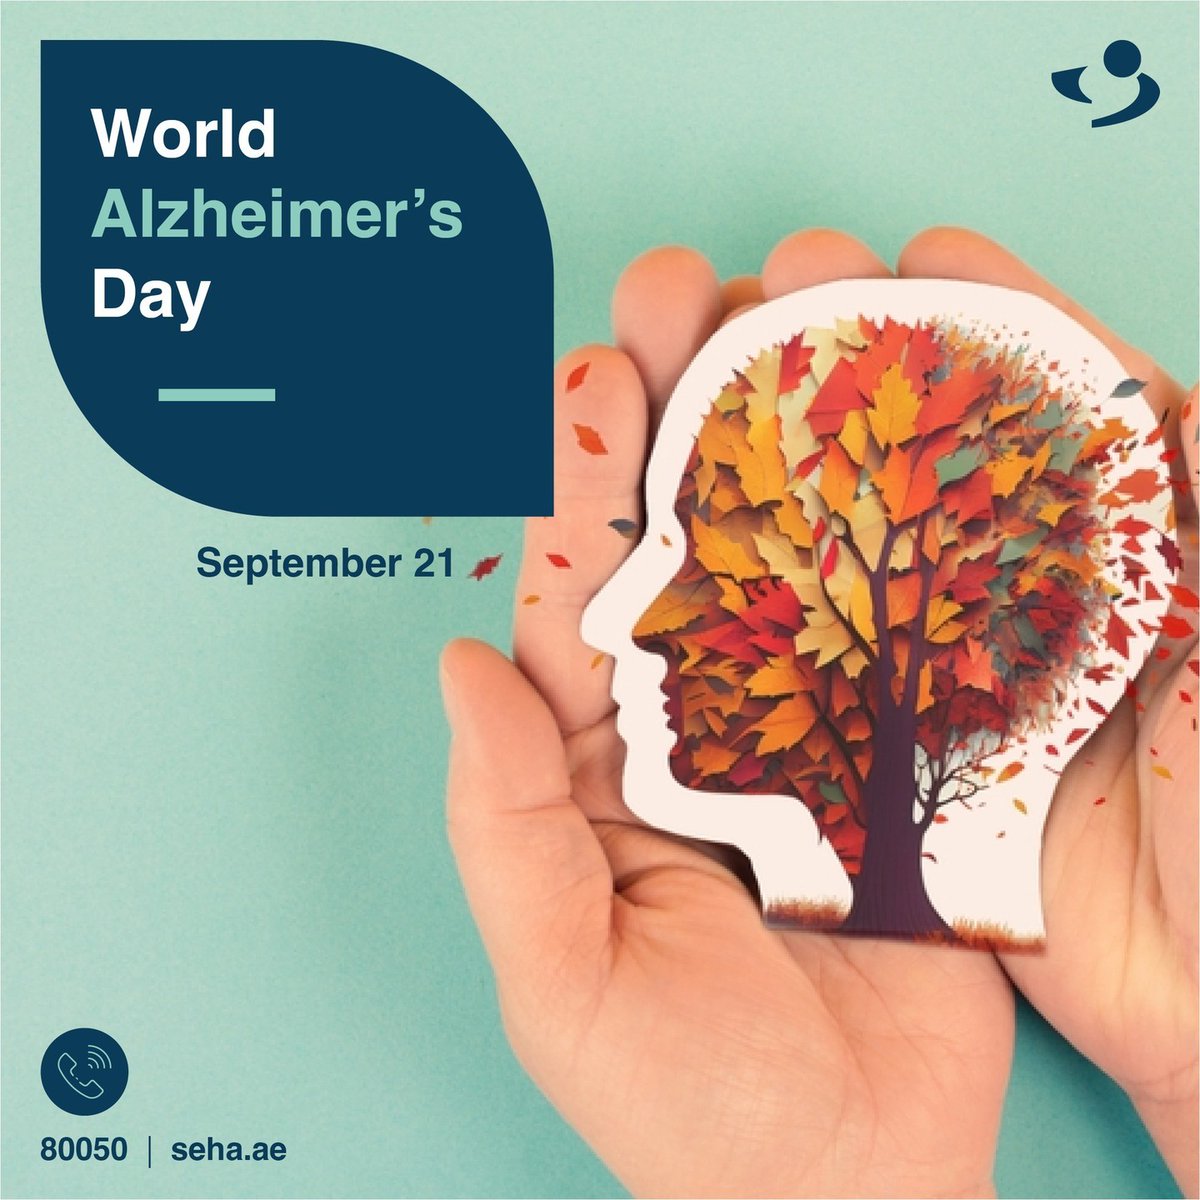 On World Alzheimer's Day, let's prioritize brain health! It's #NeverTooEarlyNeverTooLate to act.

Memory loss, task difficulties, language issues, and personality changes can signal dementia. Early recognition and help make a difference for those affected.